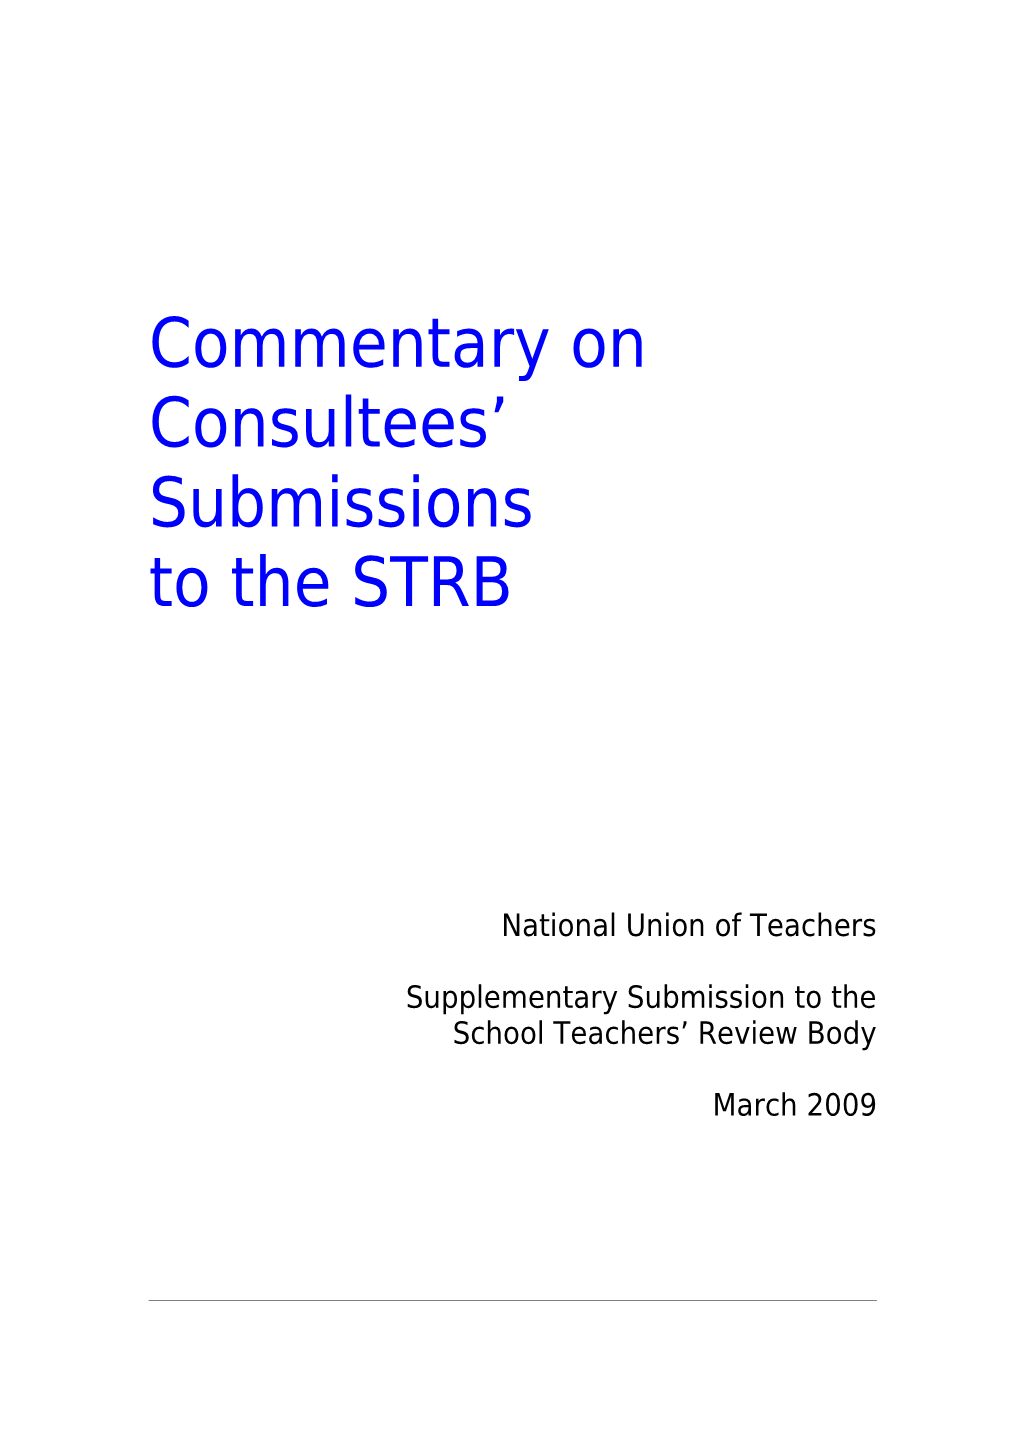 Draft Strb Submission: February 2009